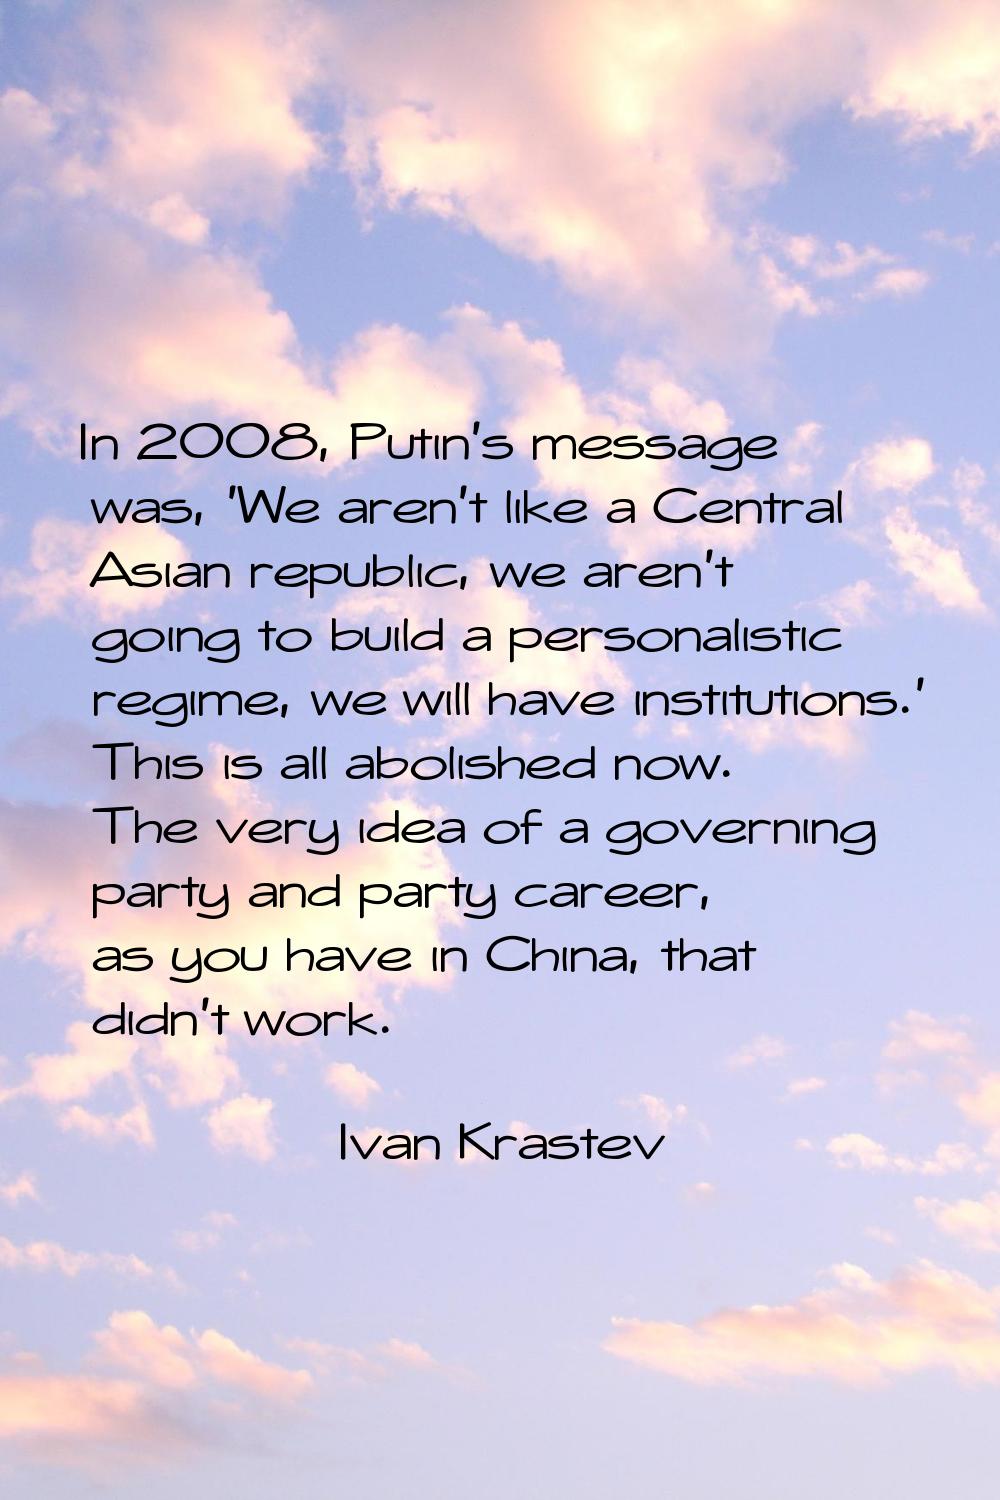 In 2008, Putin's message was, 'We aren't like a Central Asian republic, we aren't going to build a 